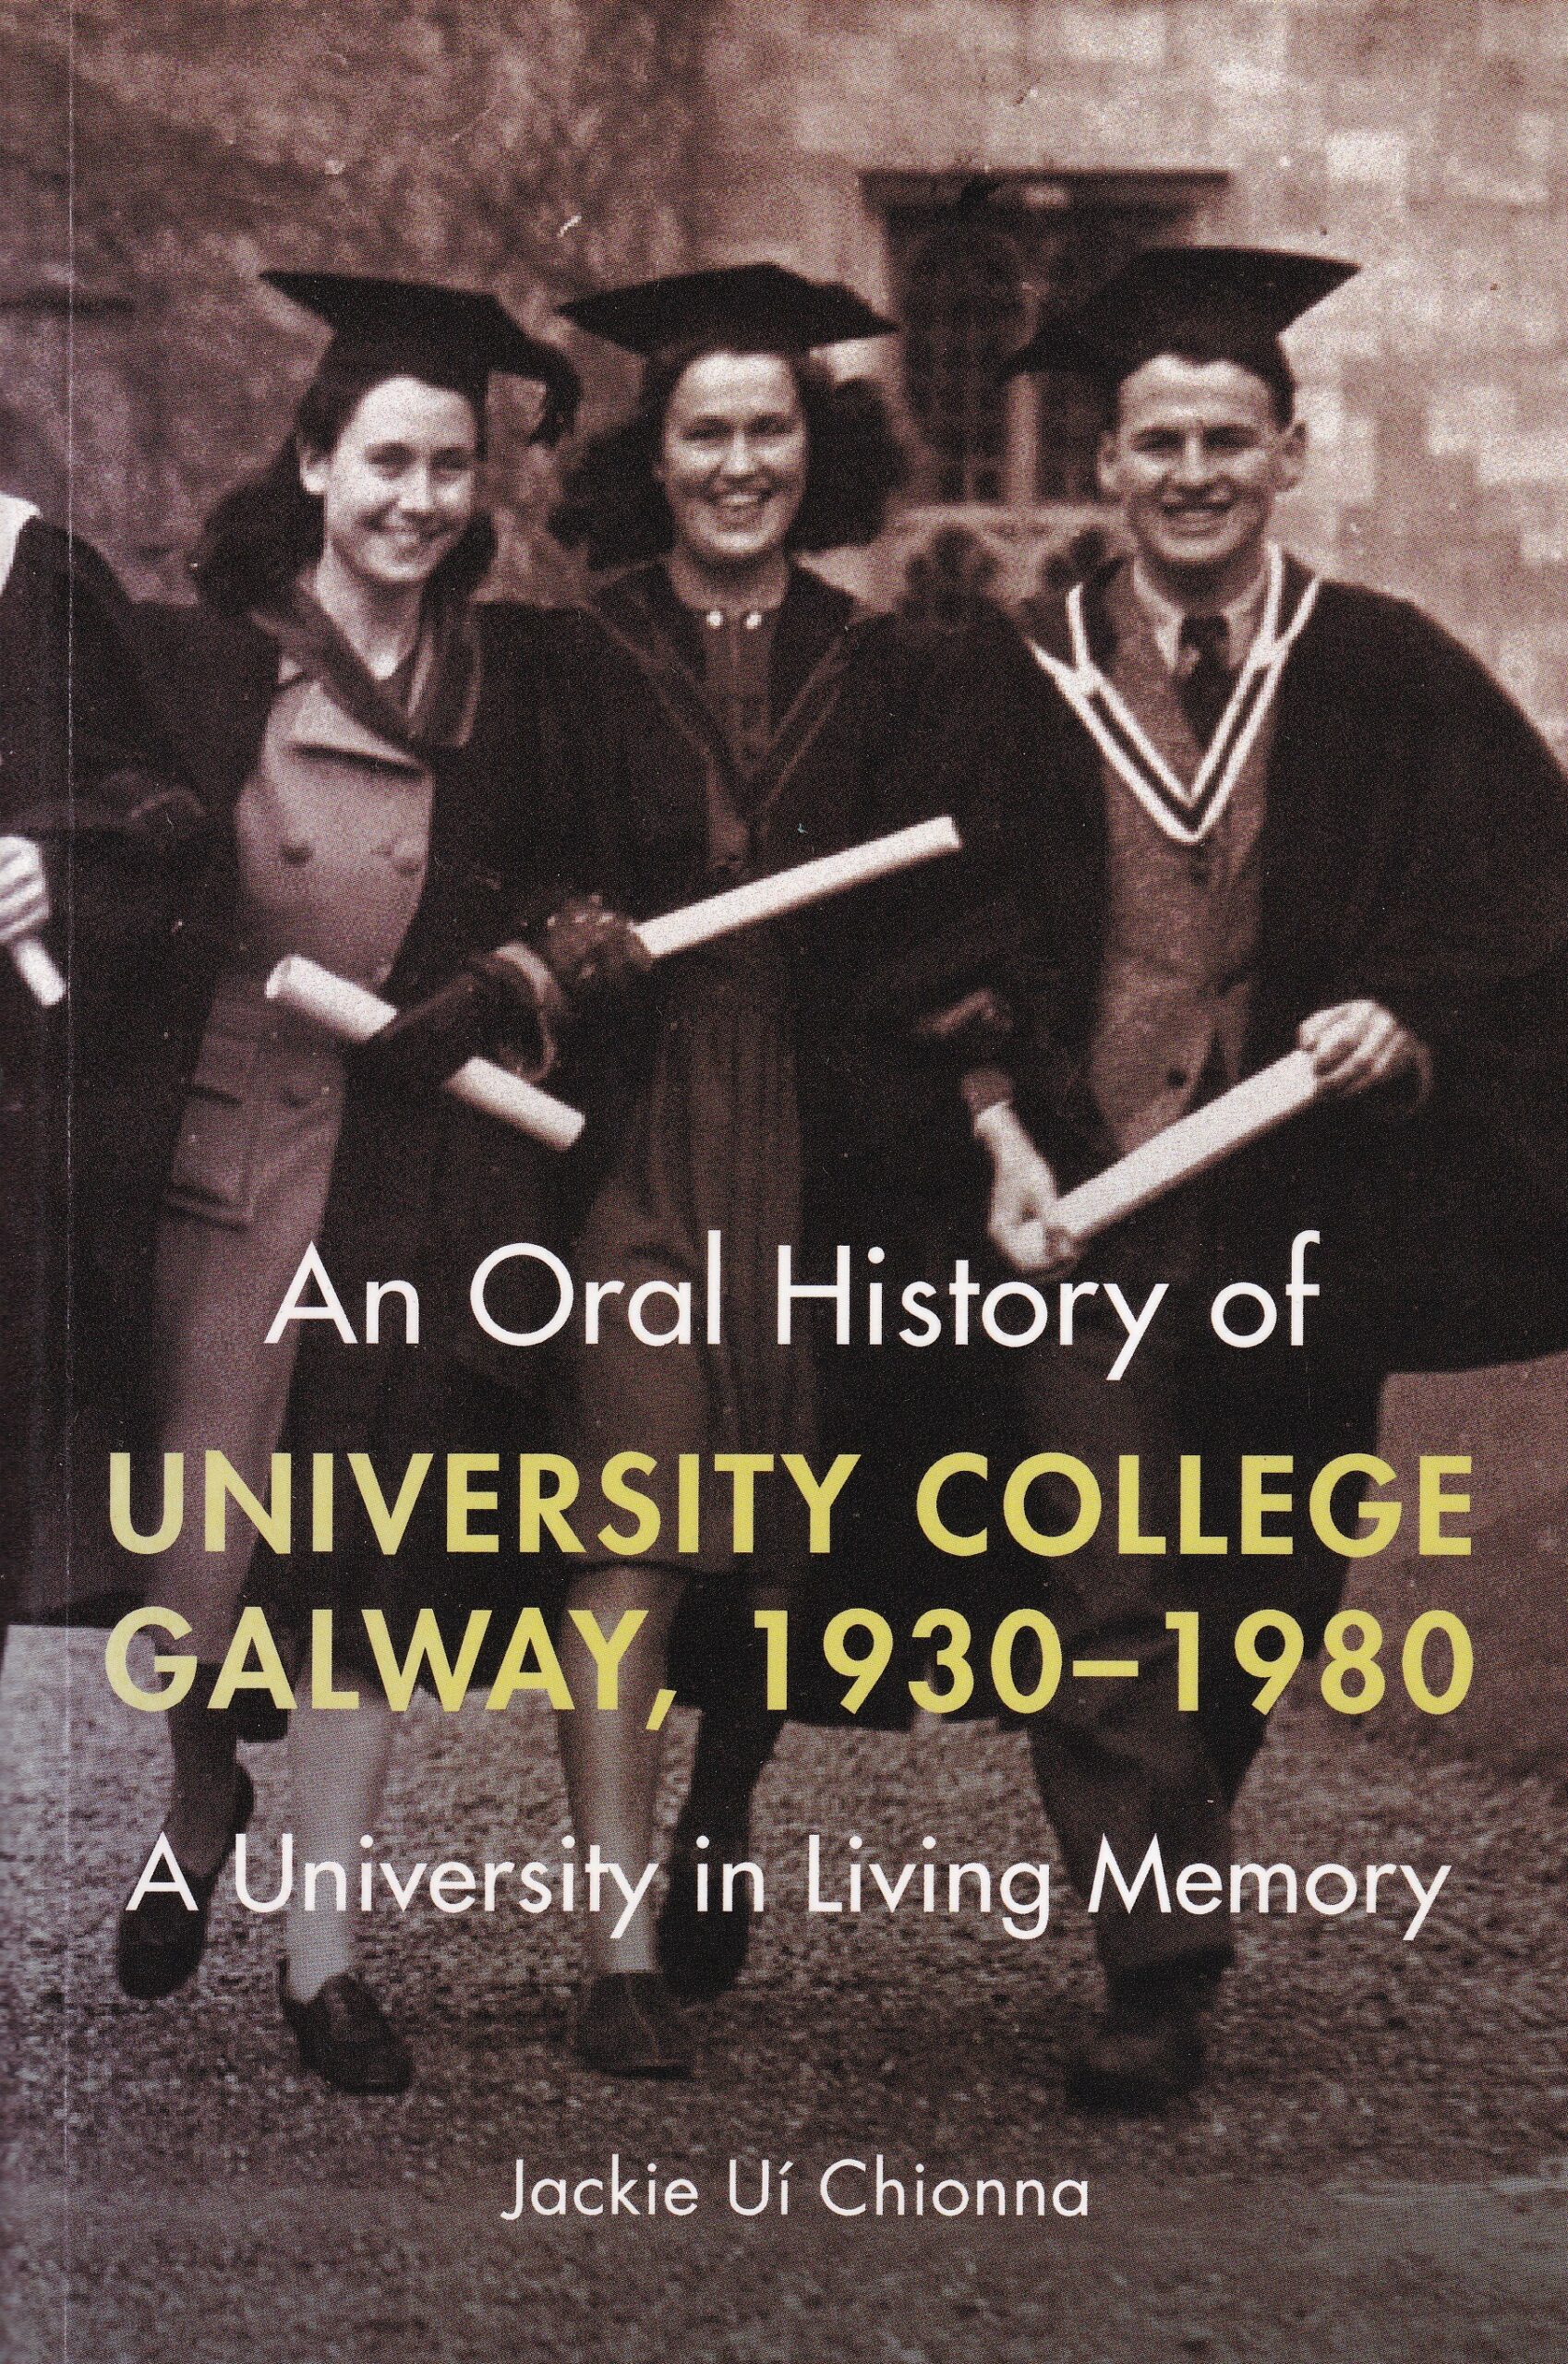 An Oral History of University College Galway, 1930-1980: A University in Living Memory by Jackie Uí Chionna